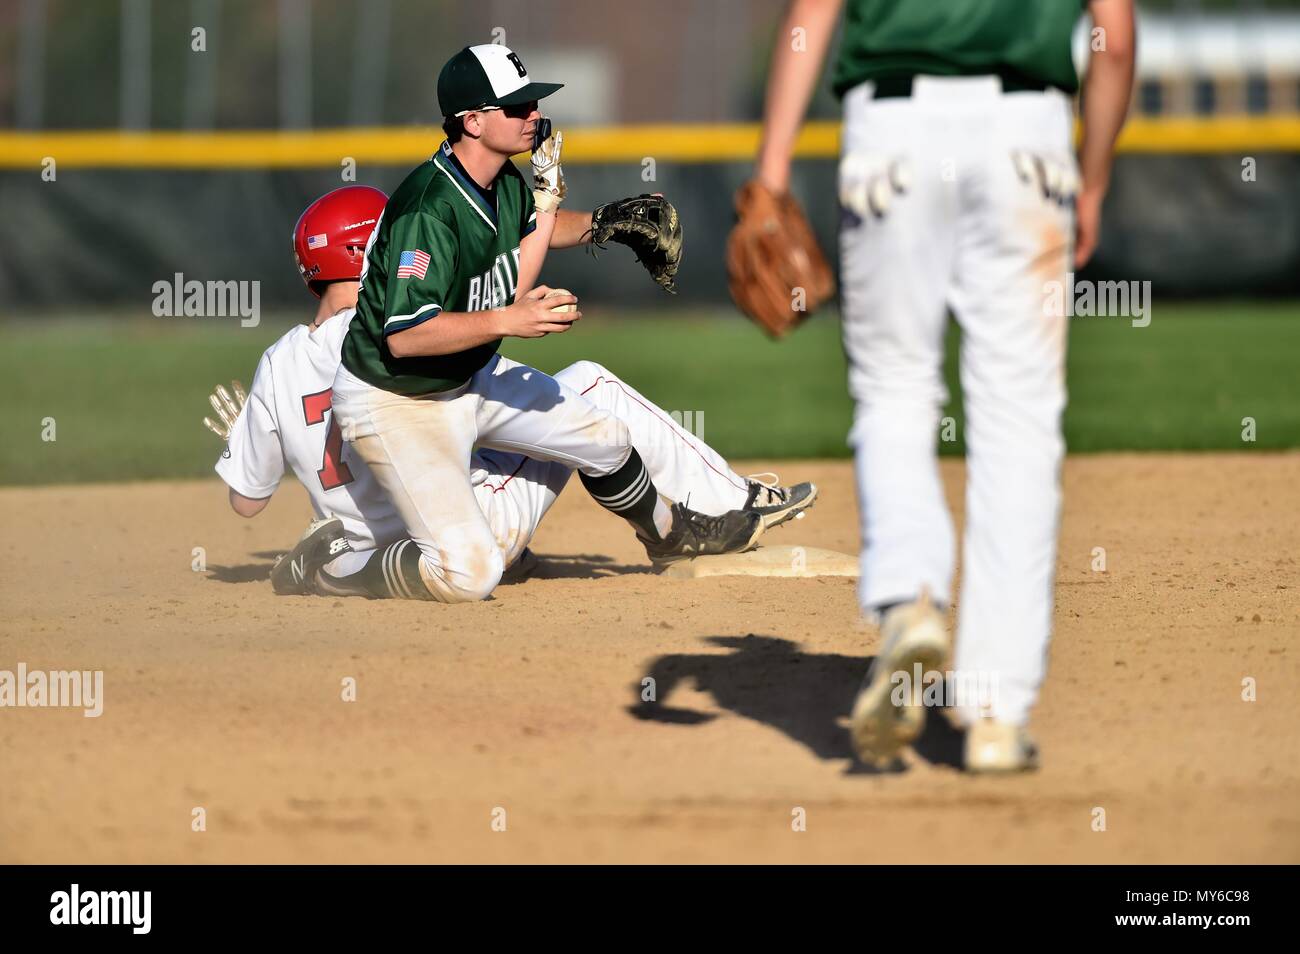 Second baseman looks to the base umpire for a call after attempting to complete a force play at second base. USA. Stock Photo